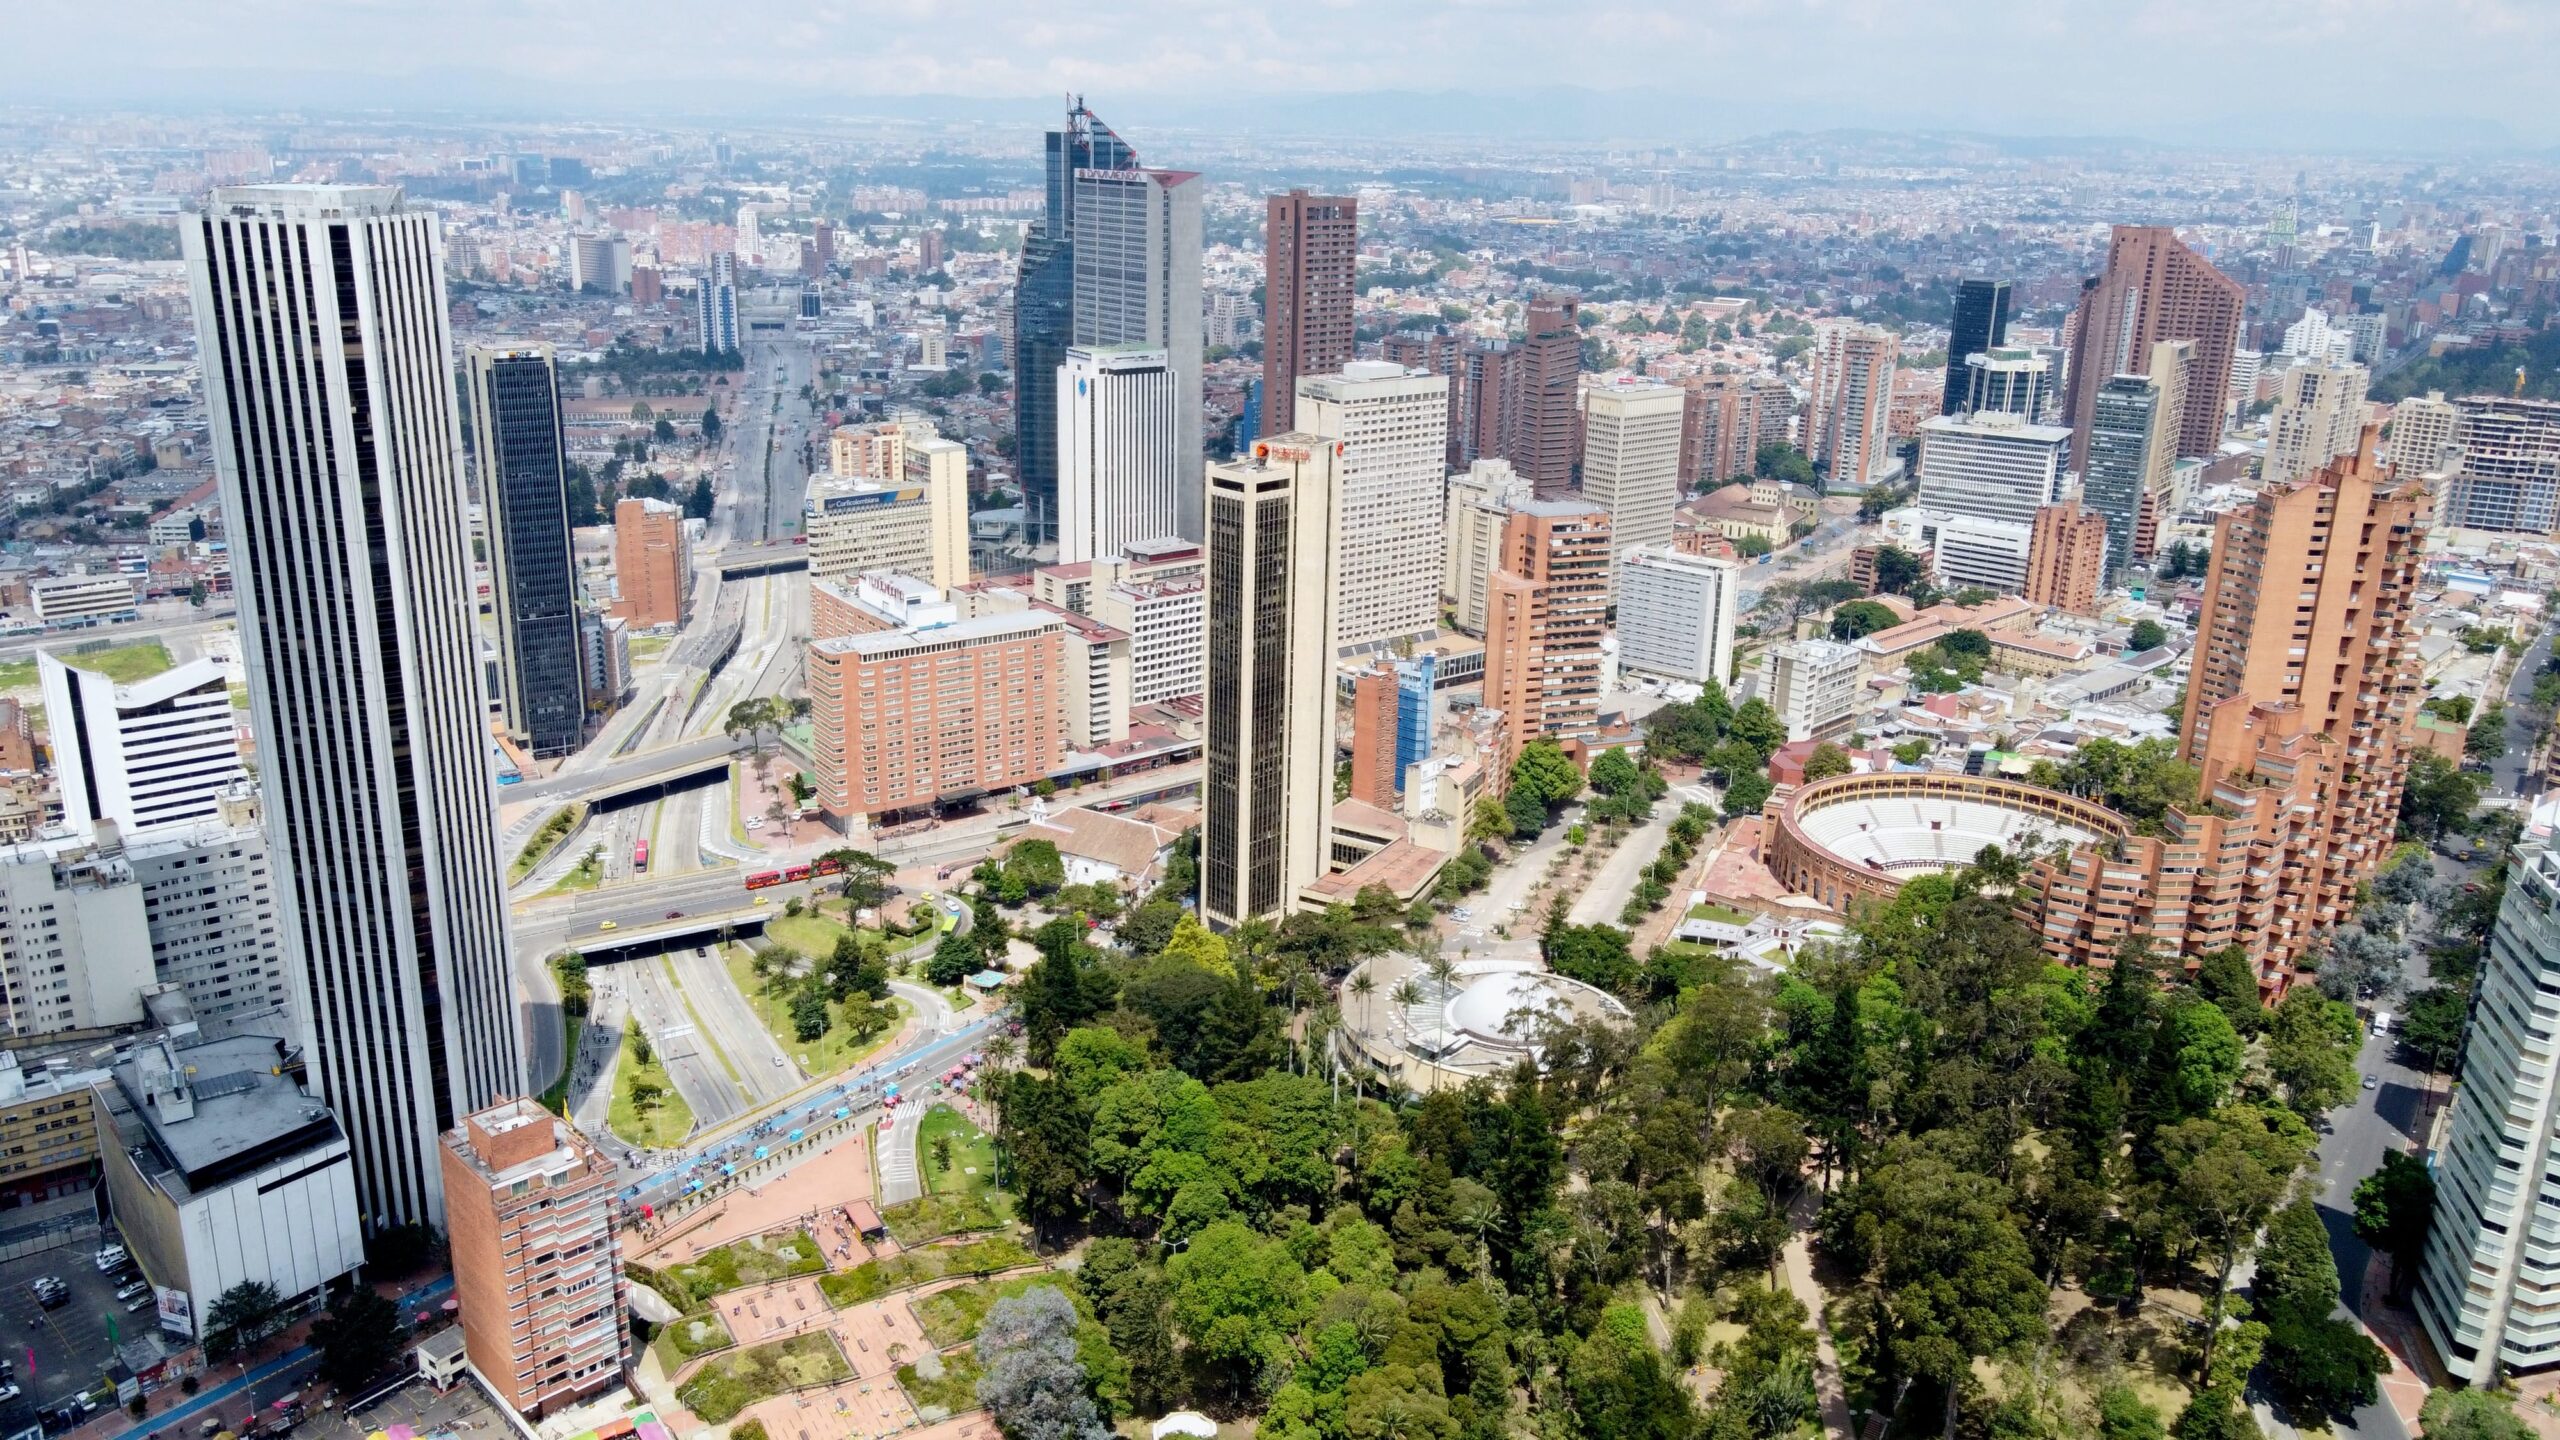 Bogota's downtown (Centro) from above Calle 26